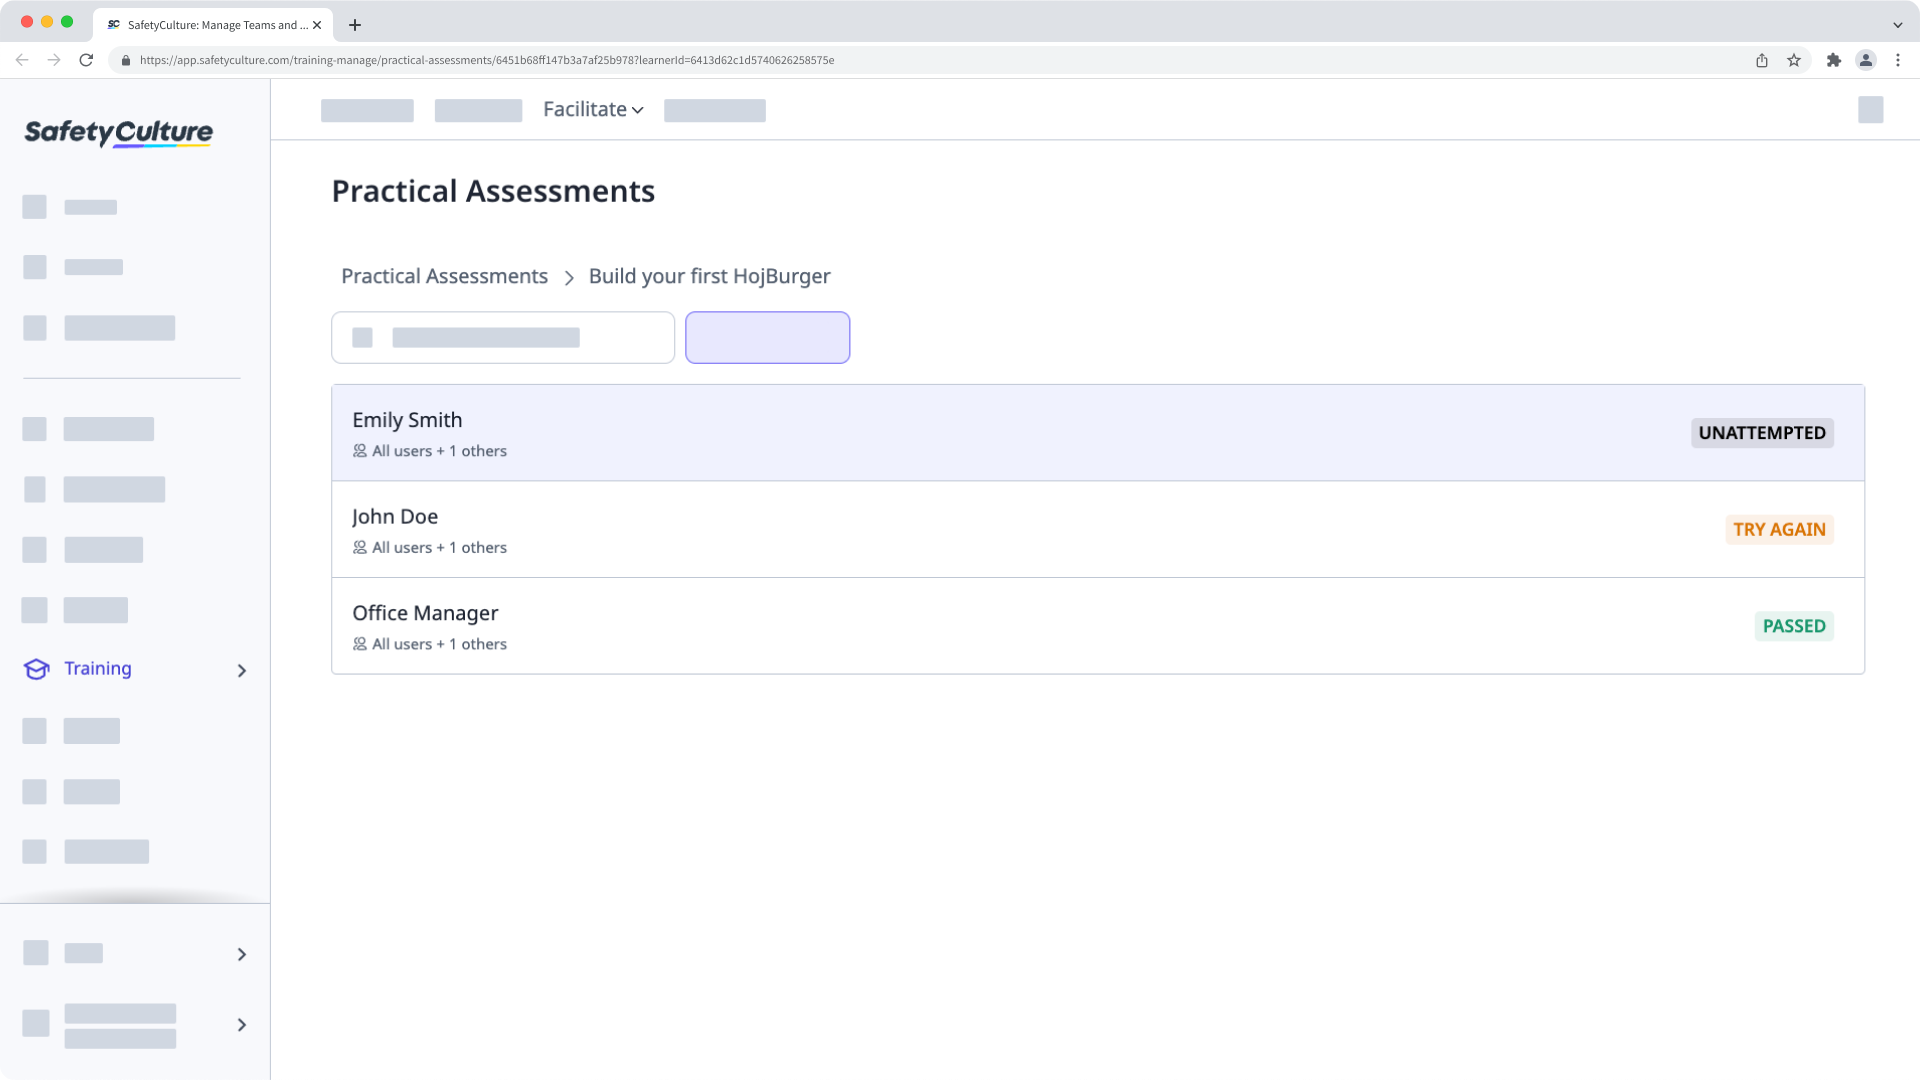 Conduct a practical assessment for a team member via the web app.